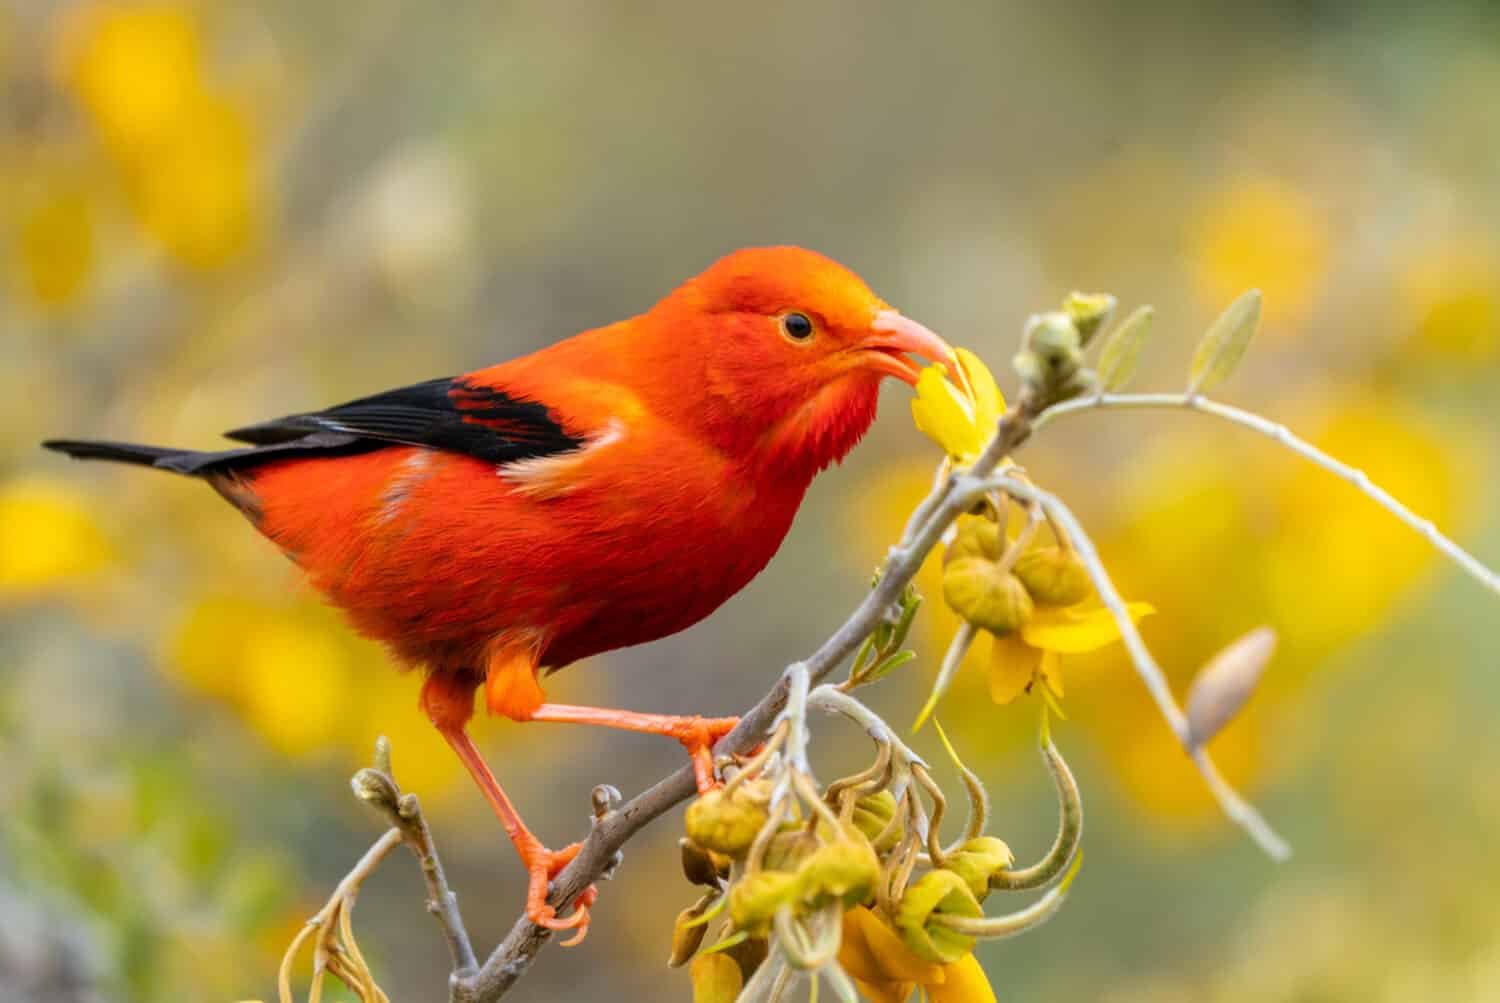 The I'iwi is an endemic bird of the Hawaiian Islands.  This honeycreeper feeds on Mamane blossoms in Hosmer Grove at high elevation on Maui.  They are stunning red birds and large curved beaks.